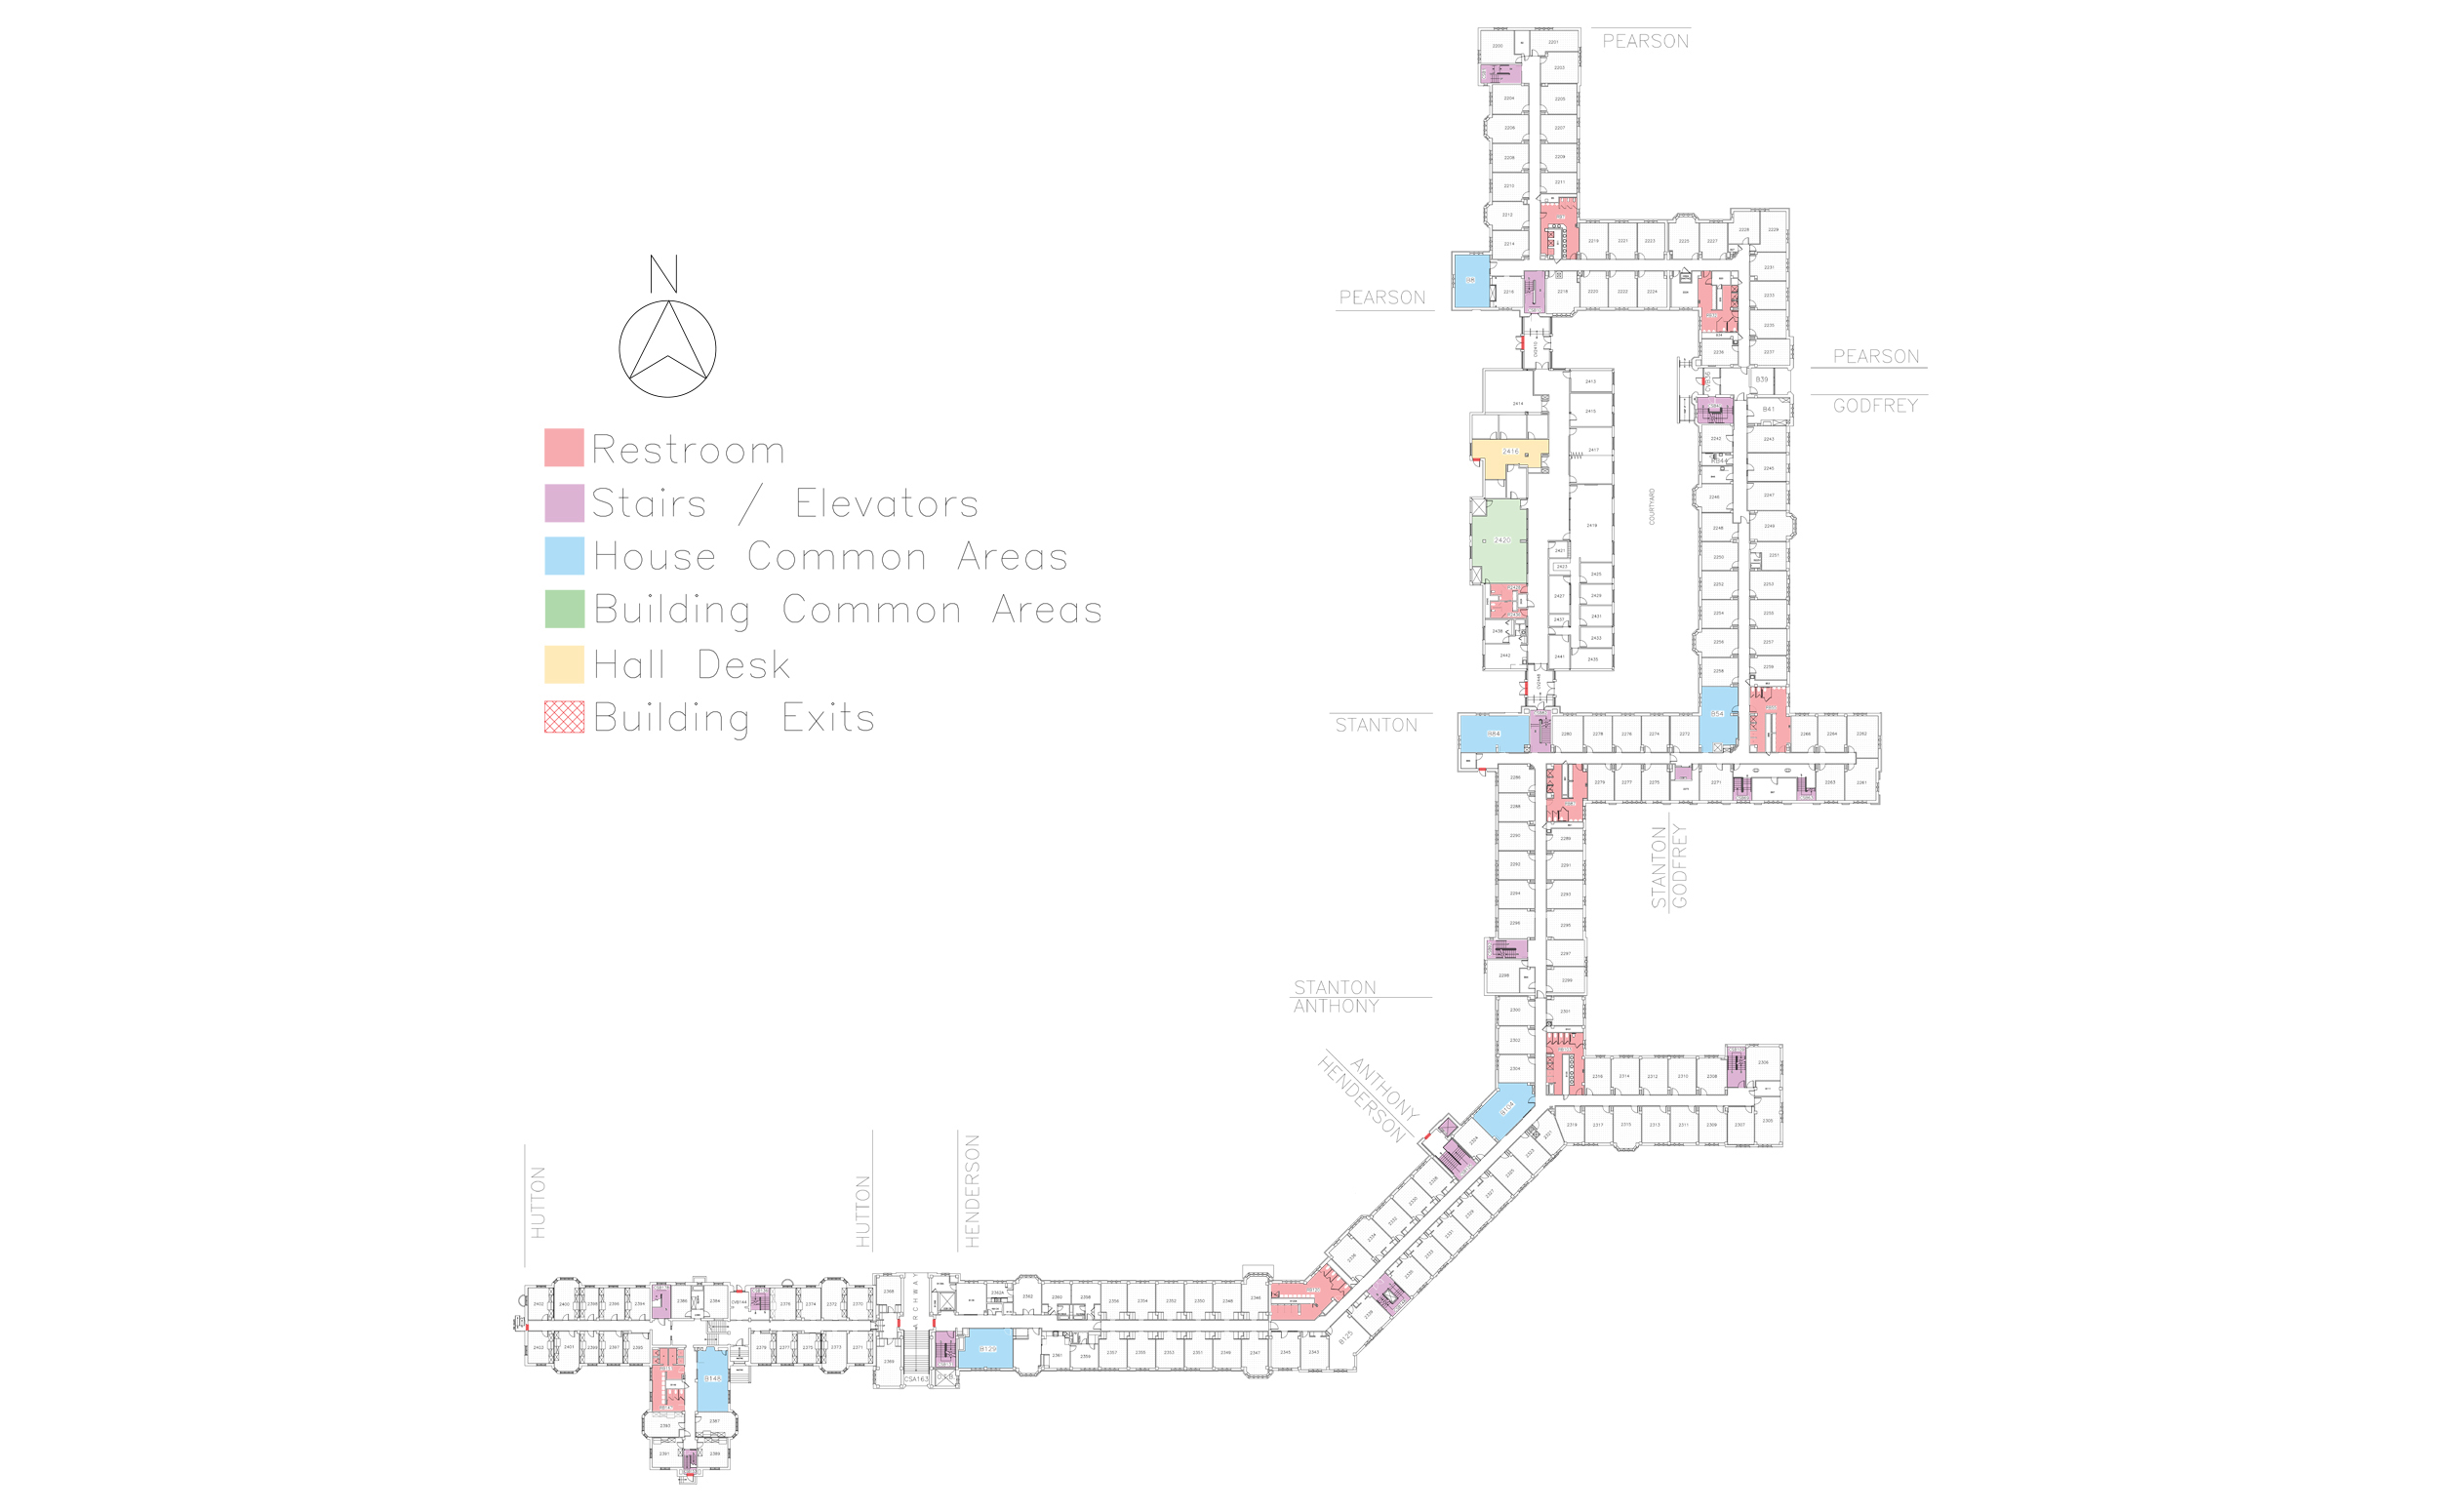 Floor plan showing house locations on the second floor of Friley Hall.